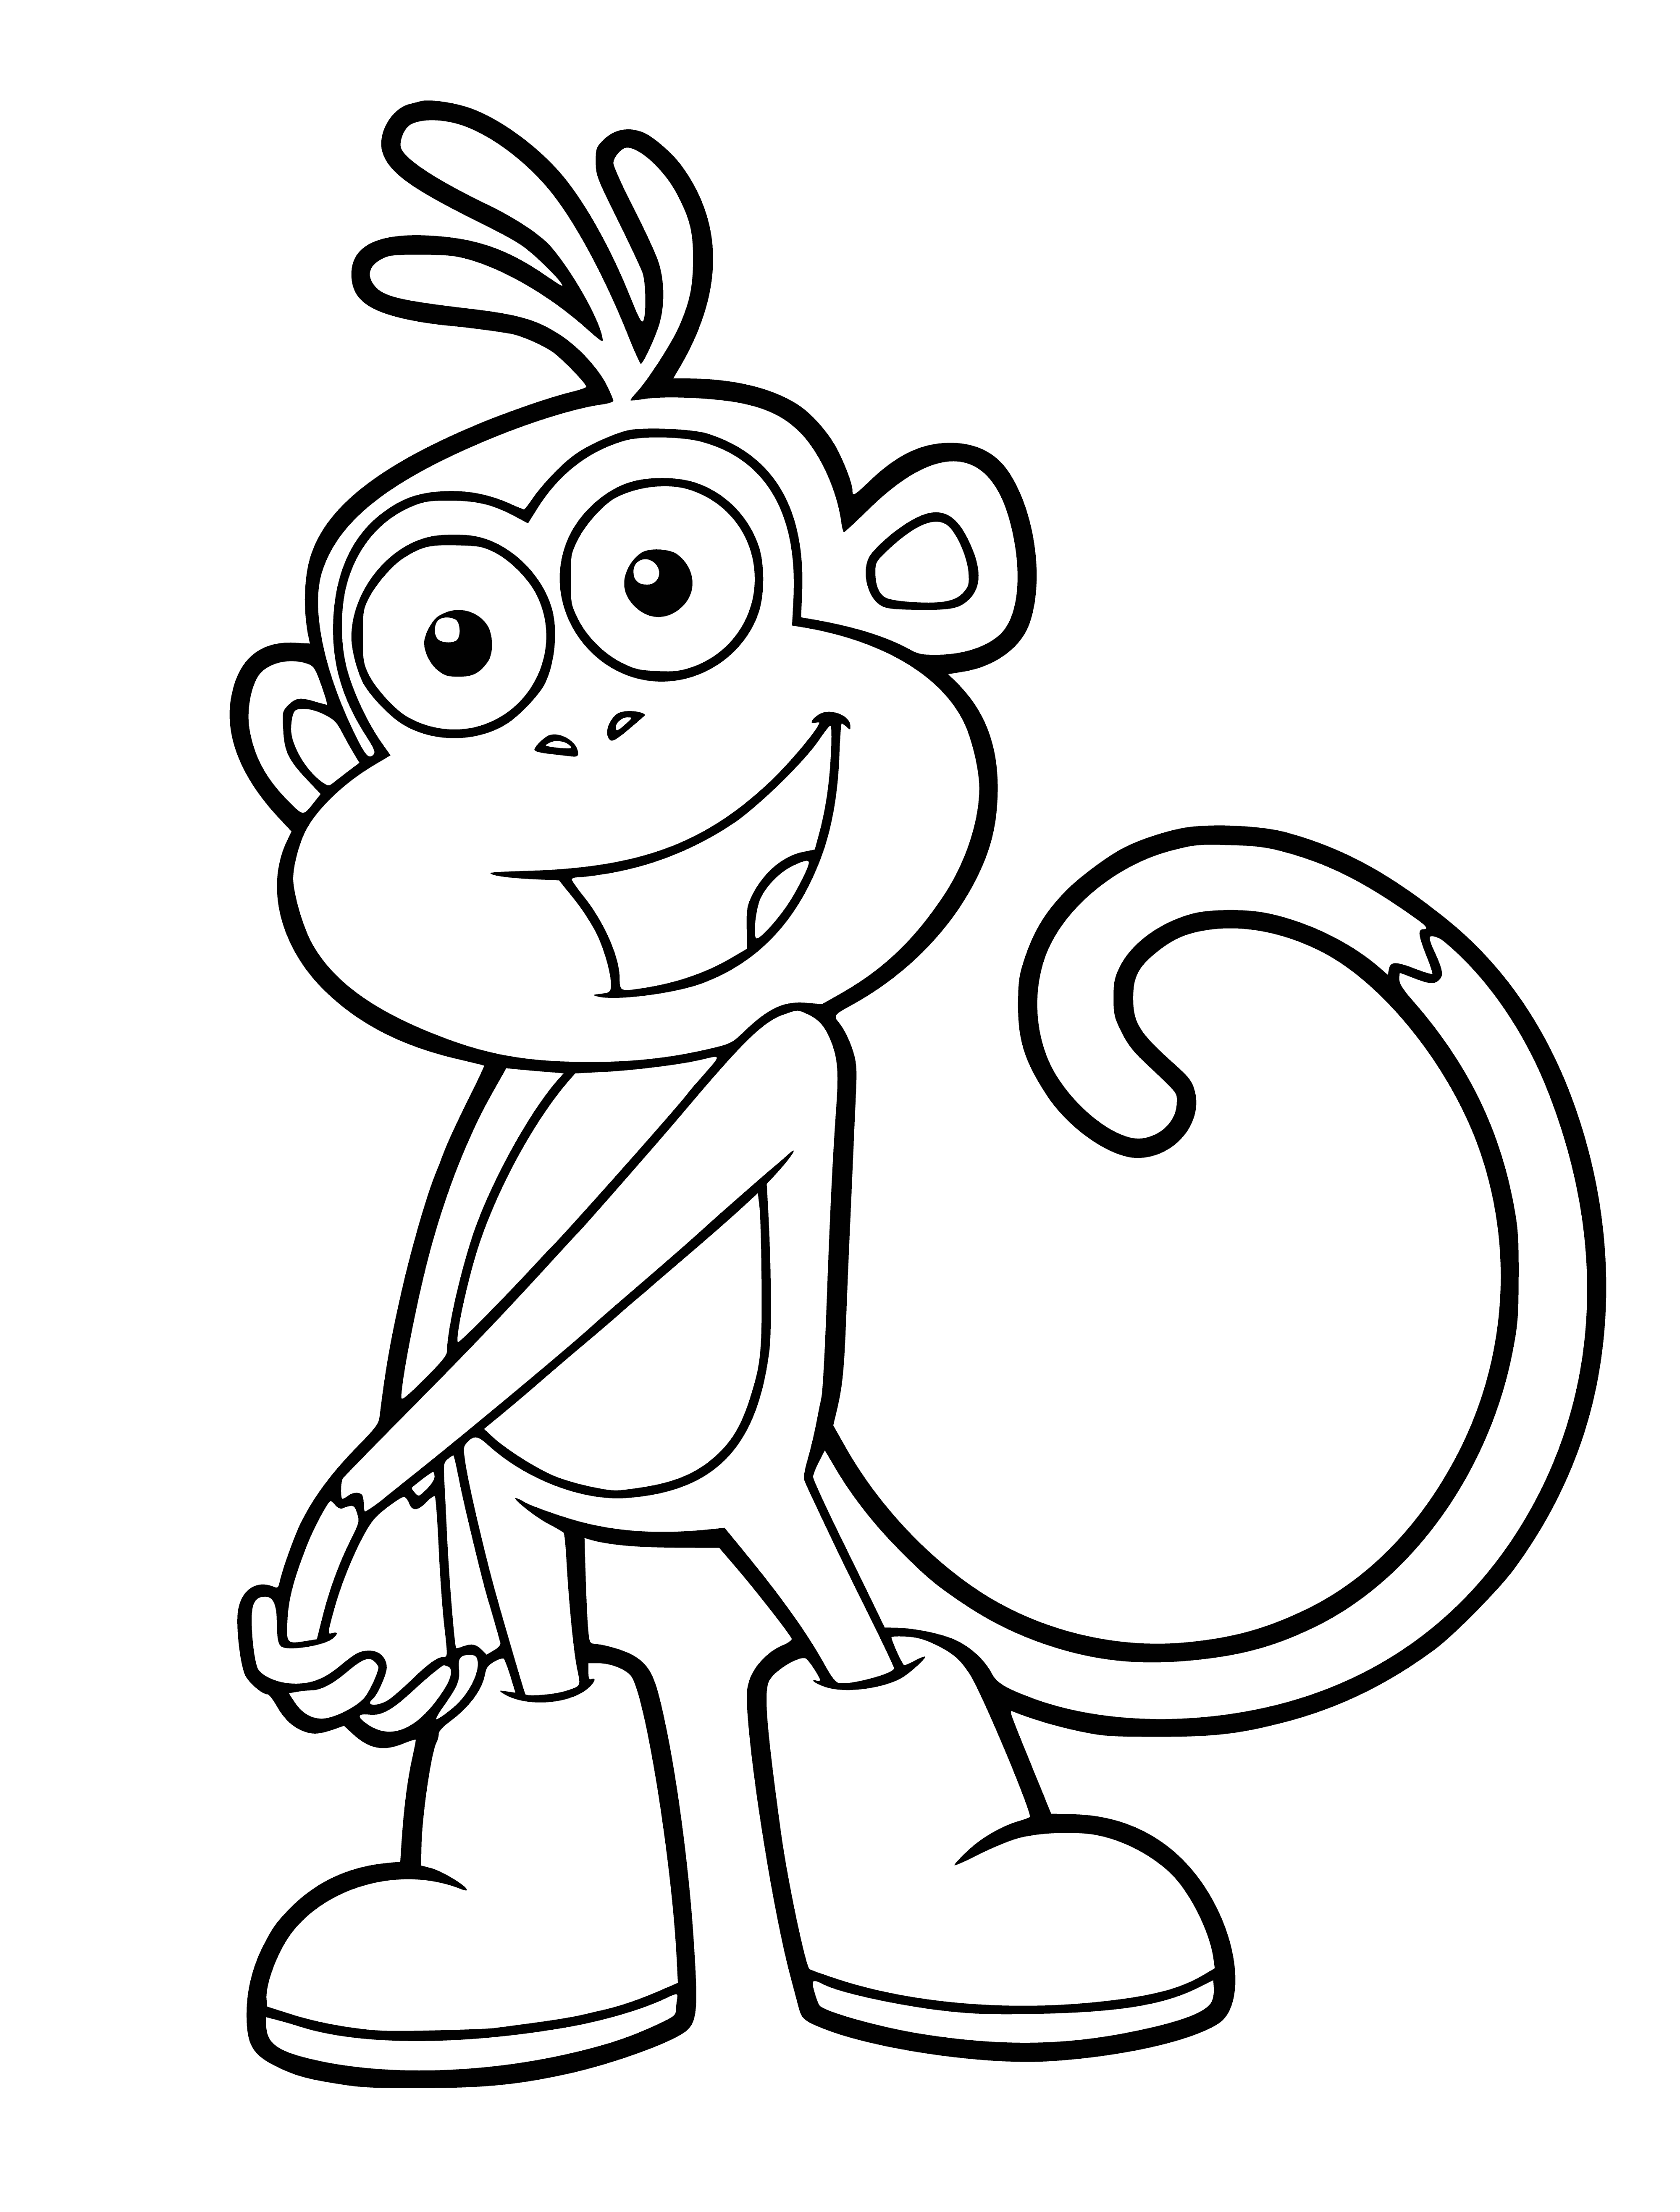 coloring page: Monkeys sit in trees, hugging. One extends its arms while a waterfall pours in the background.